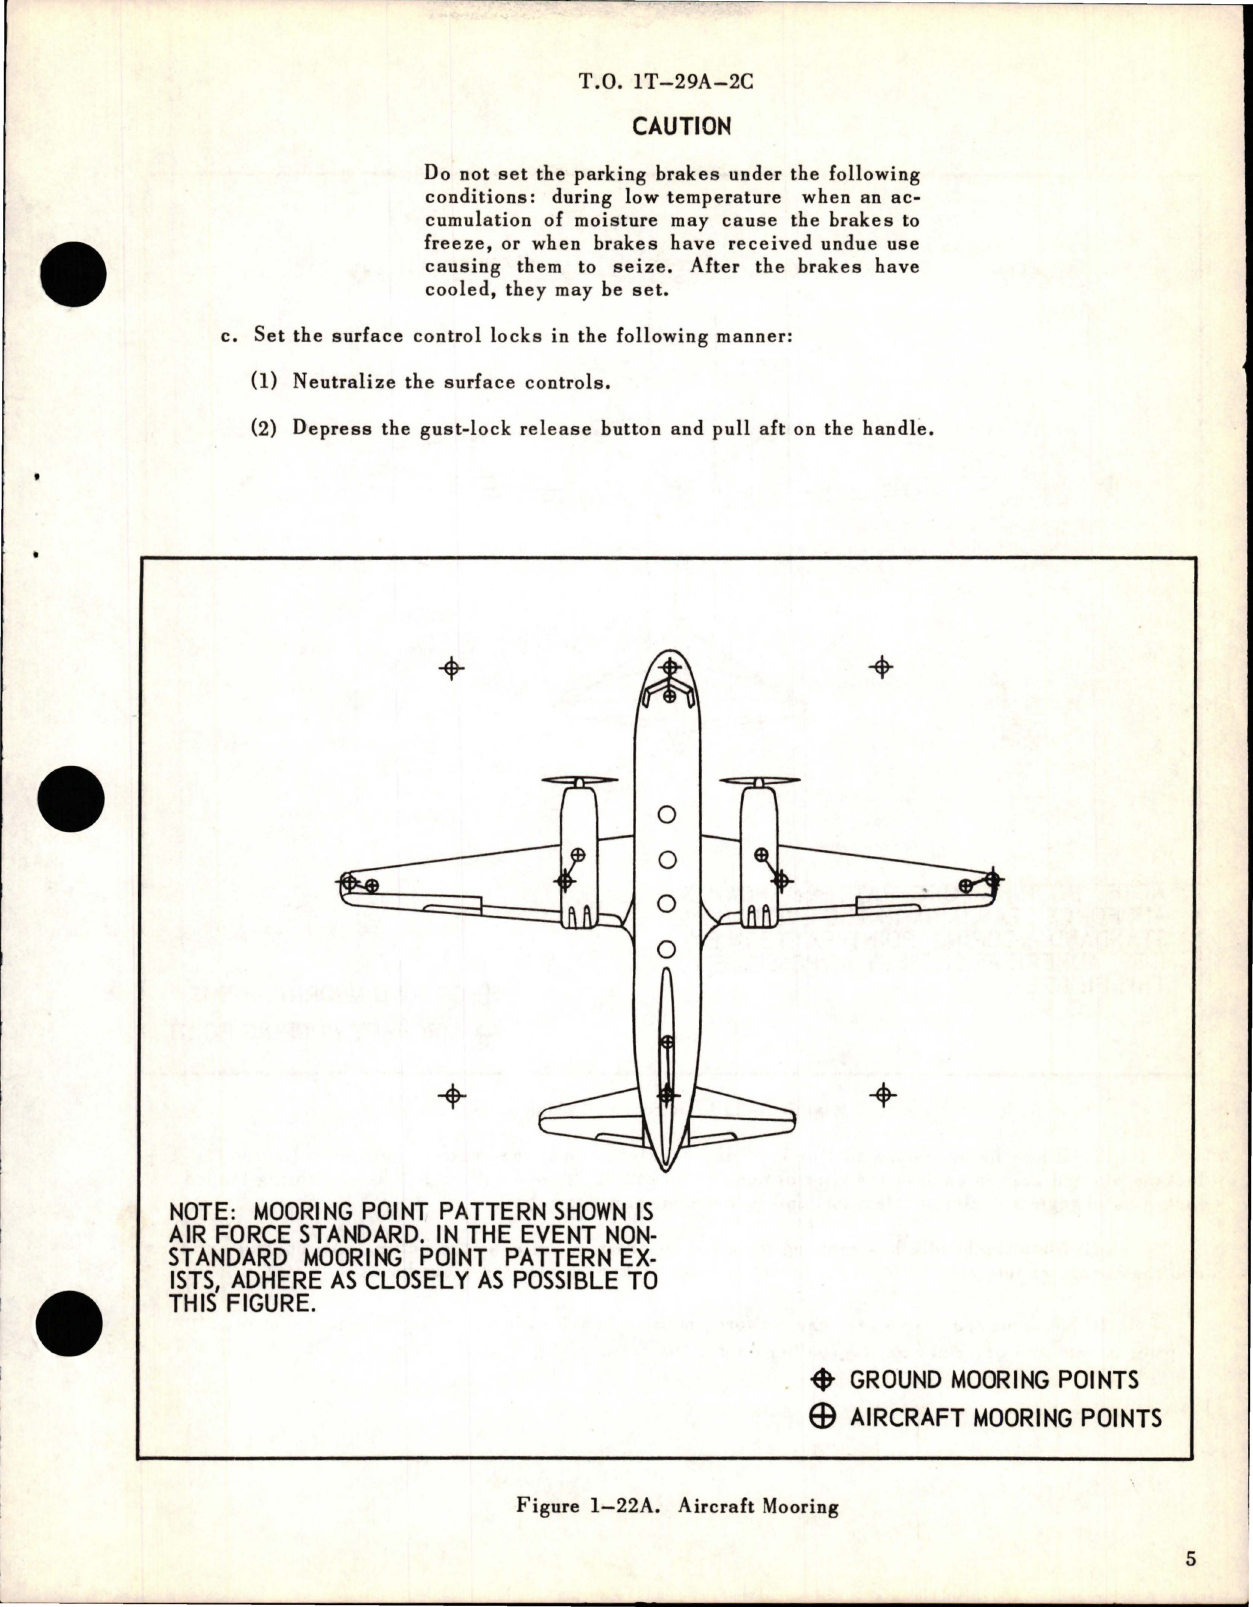 Sample page 5 from AirCorps Library document: Supplement to Maintenance Instructions for T-29A